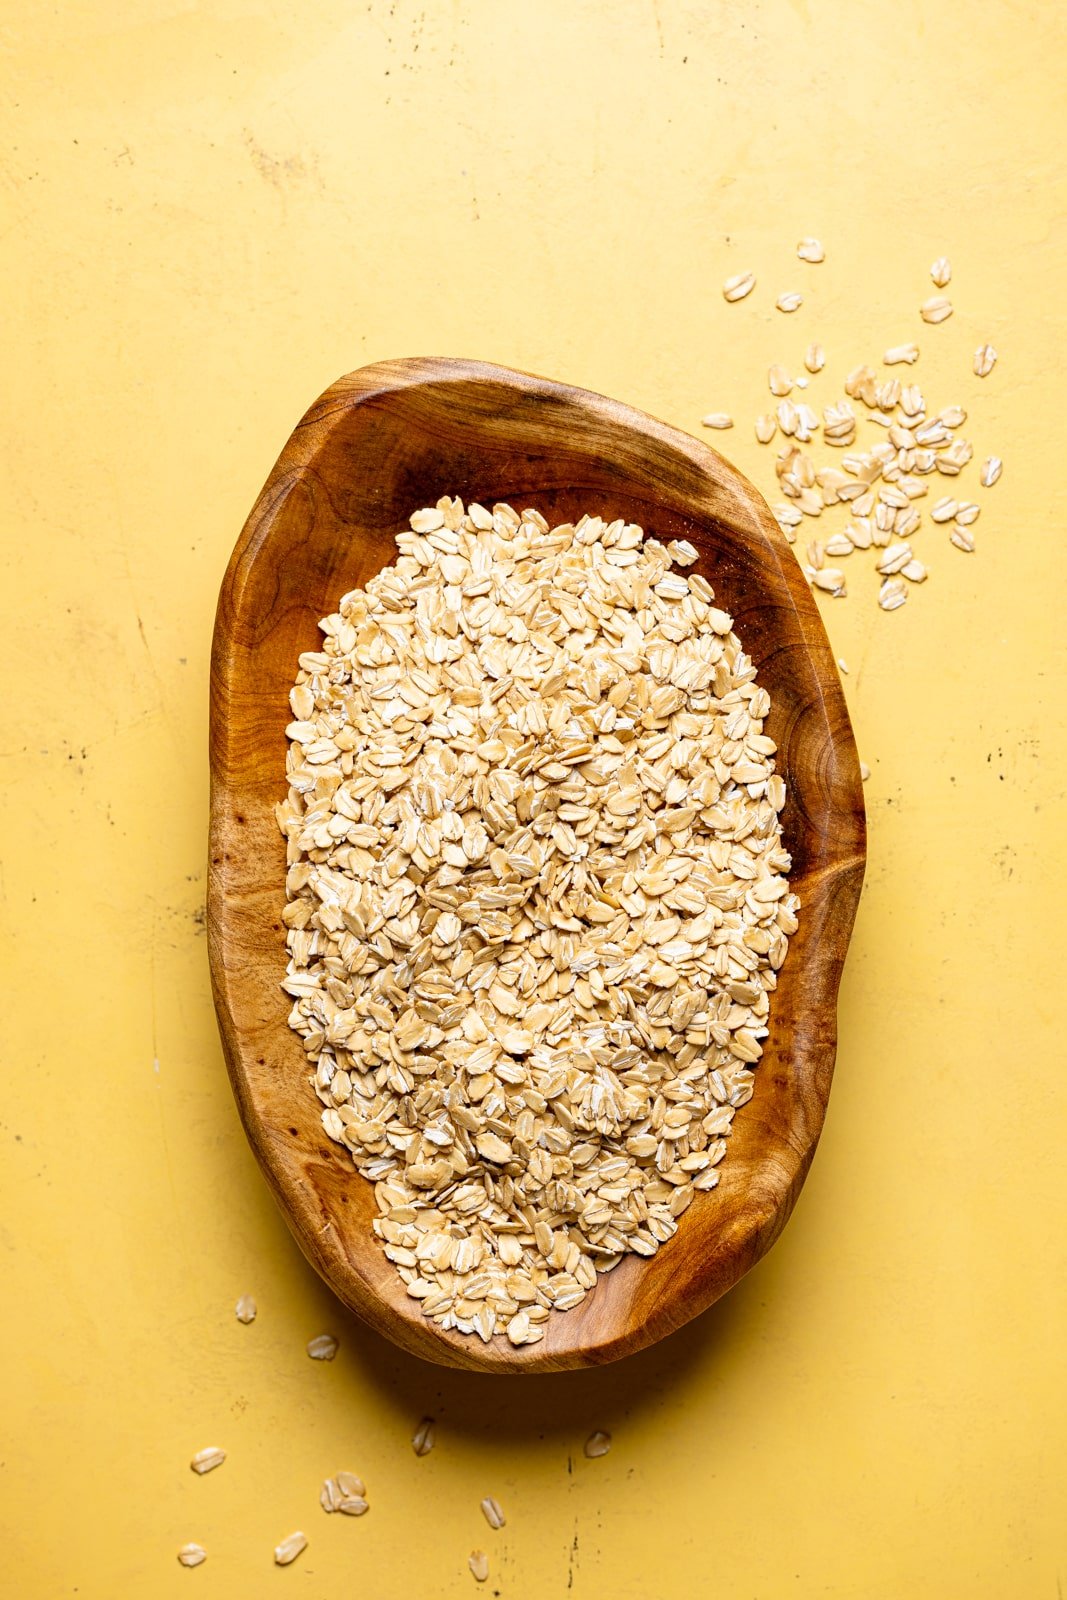 Rolled oats in a wood bowl on a yellow table.